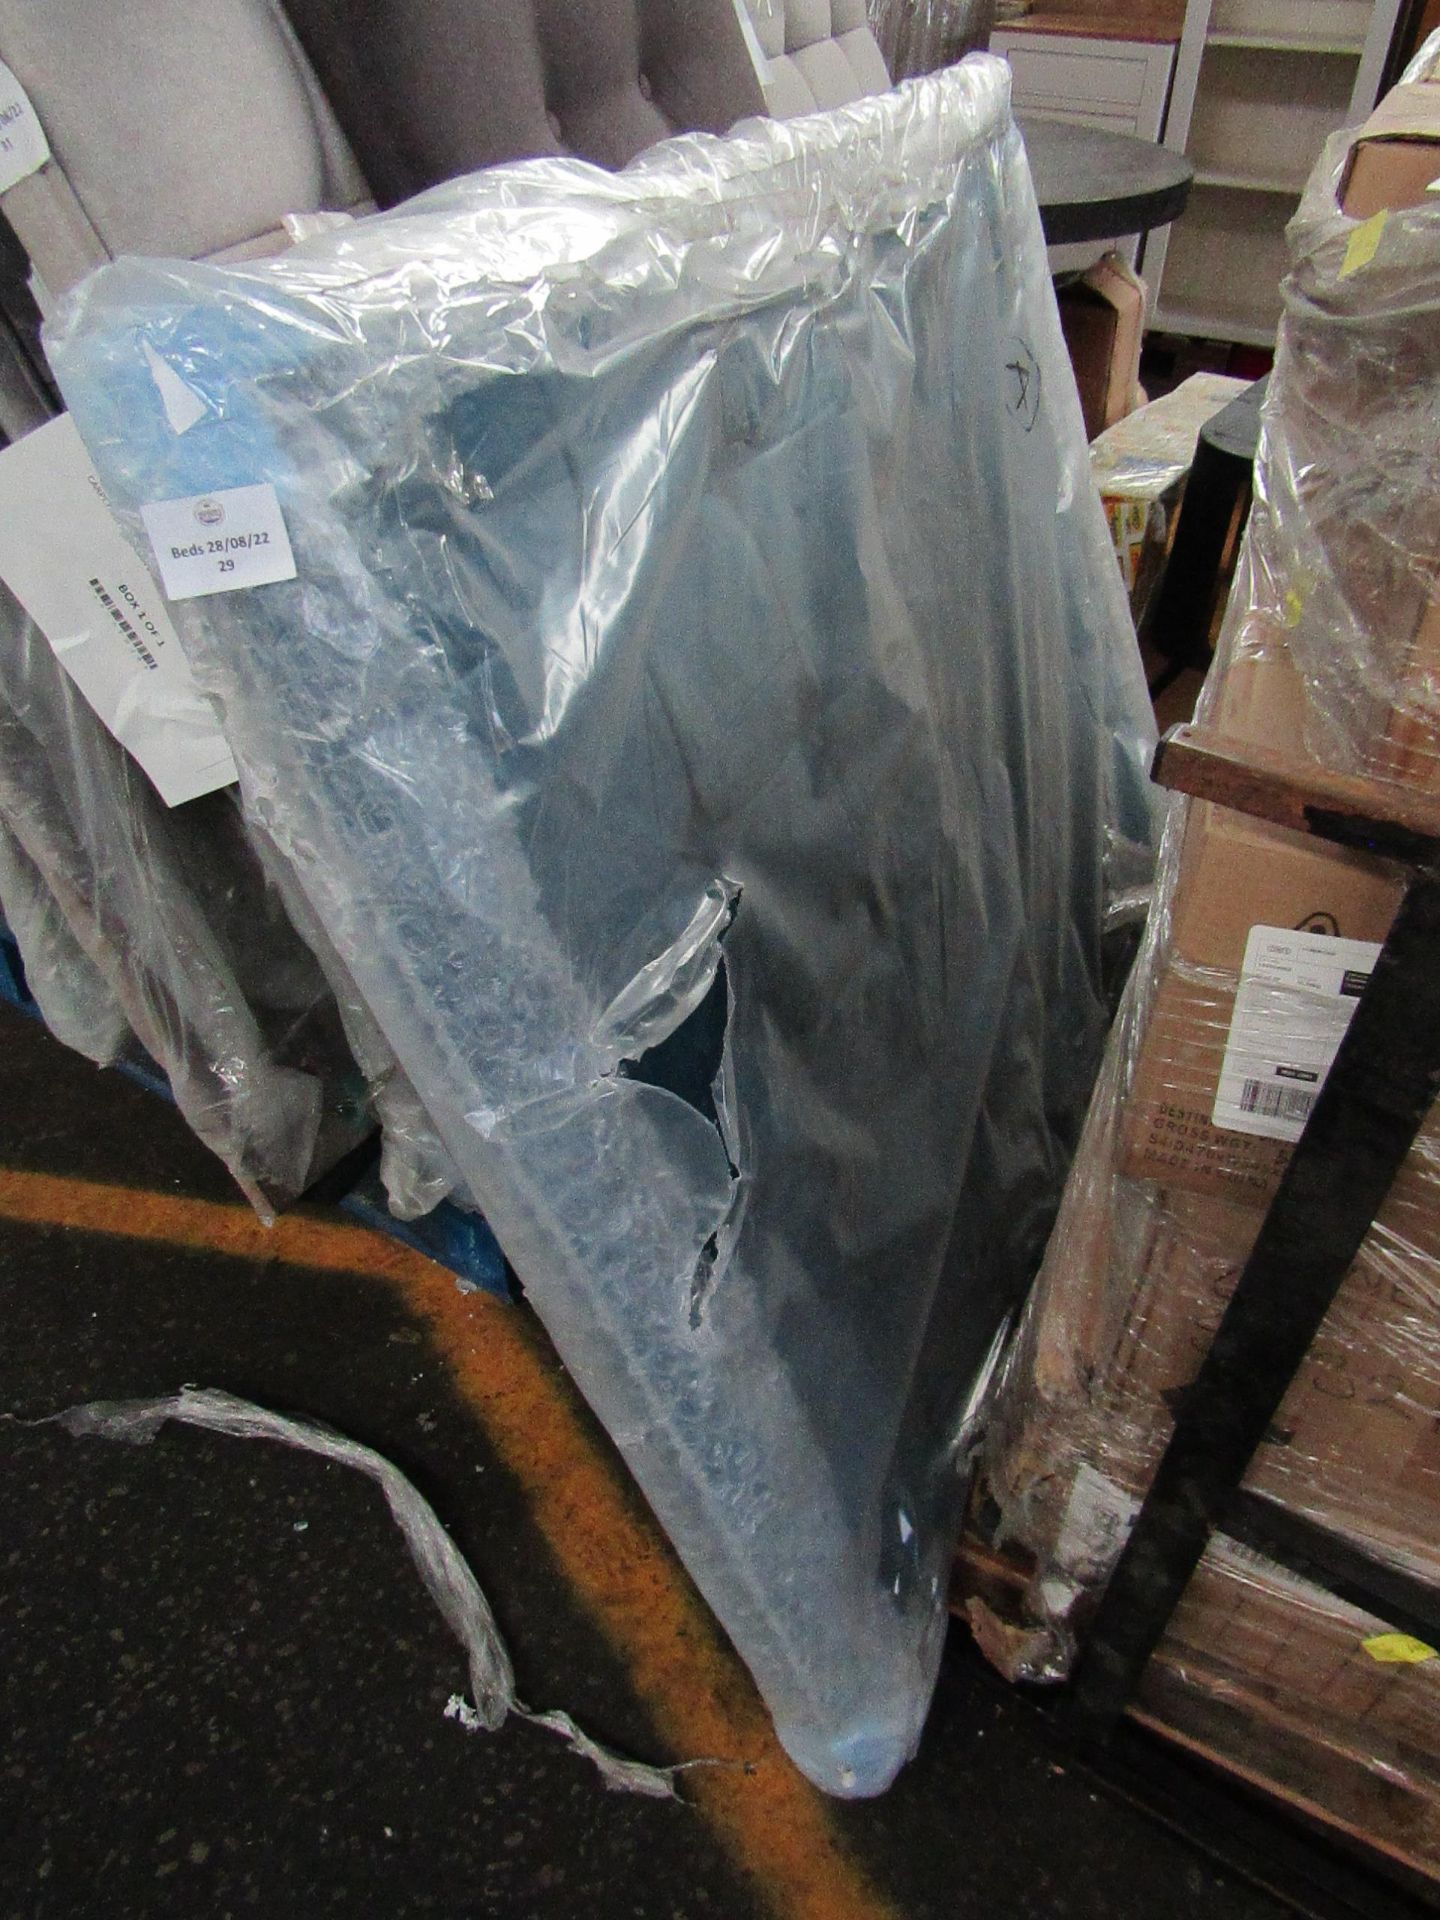 | 1X | CARPETRIGHT ARIZONA HEADBOARD 3FT SLATE | LOOKS TO BE IN GOOD CONDITION WITH PACKAGING | - Image 2 of 2